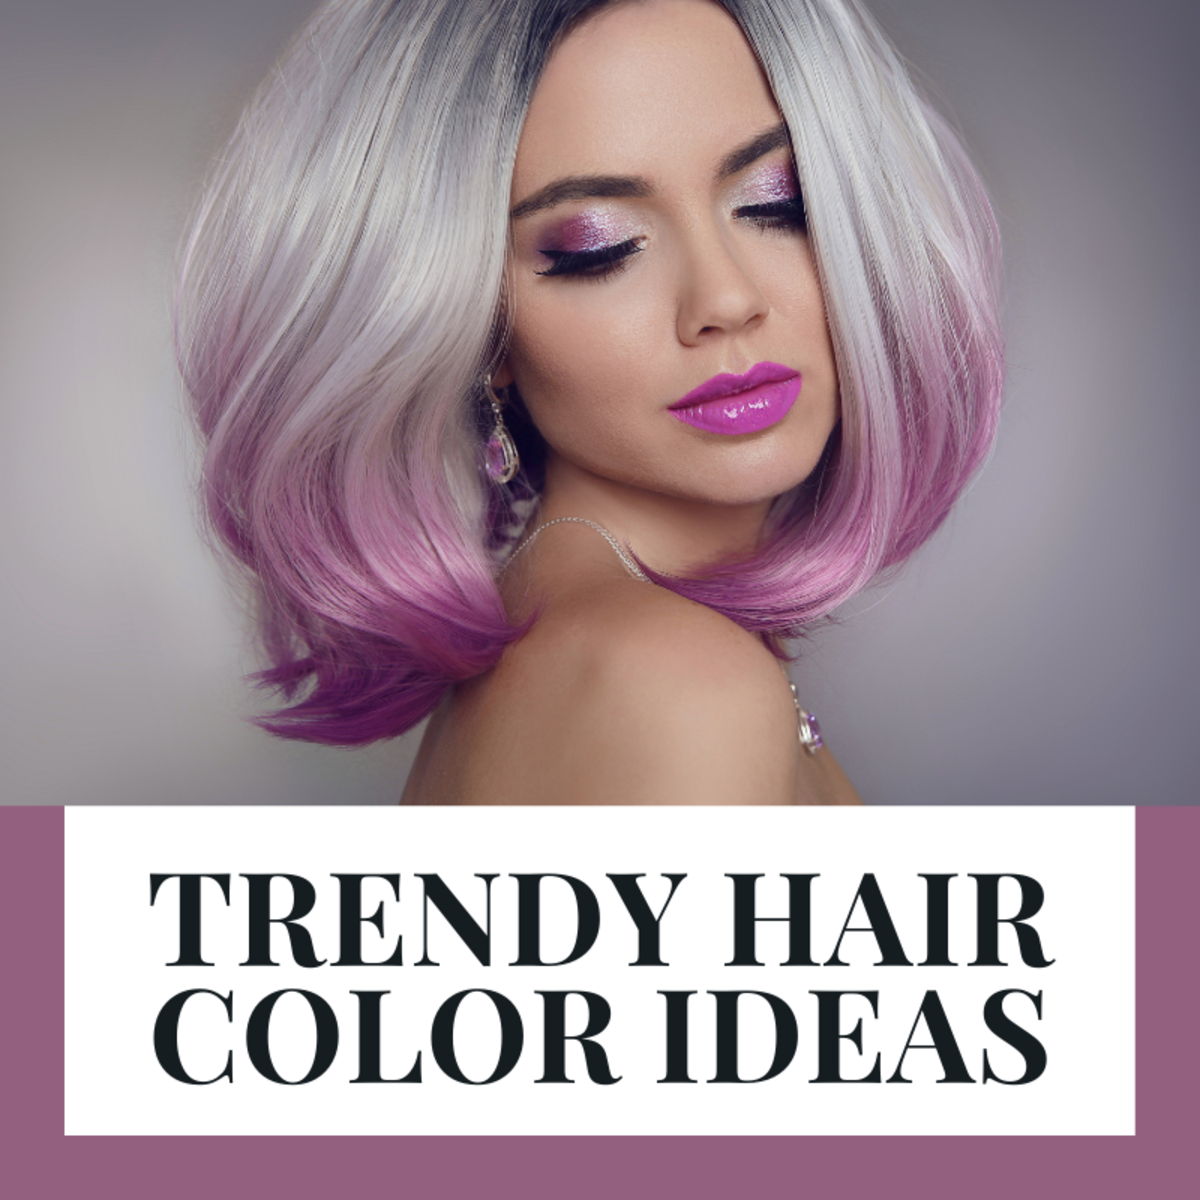 Share more than 145 trendy hair color best